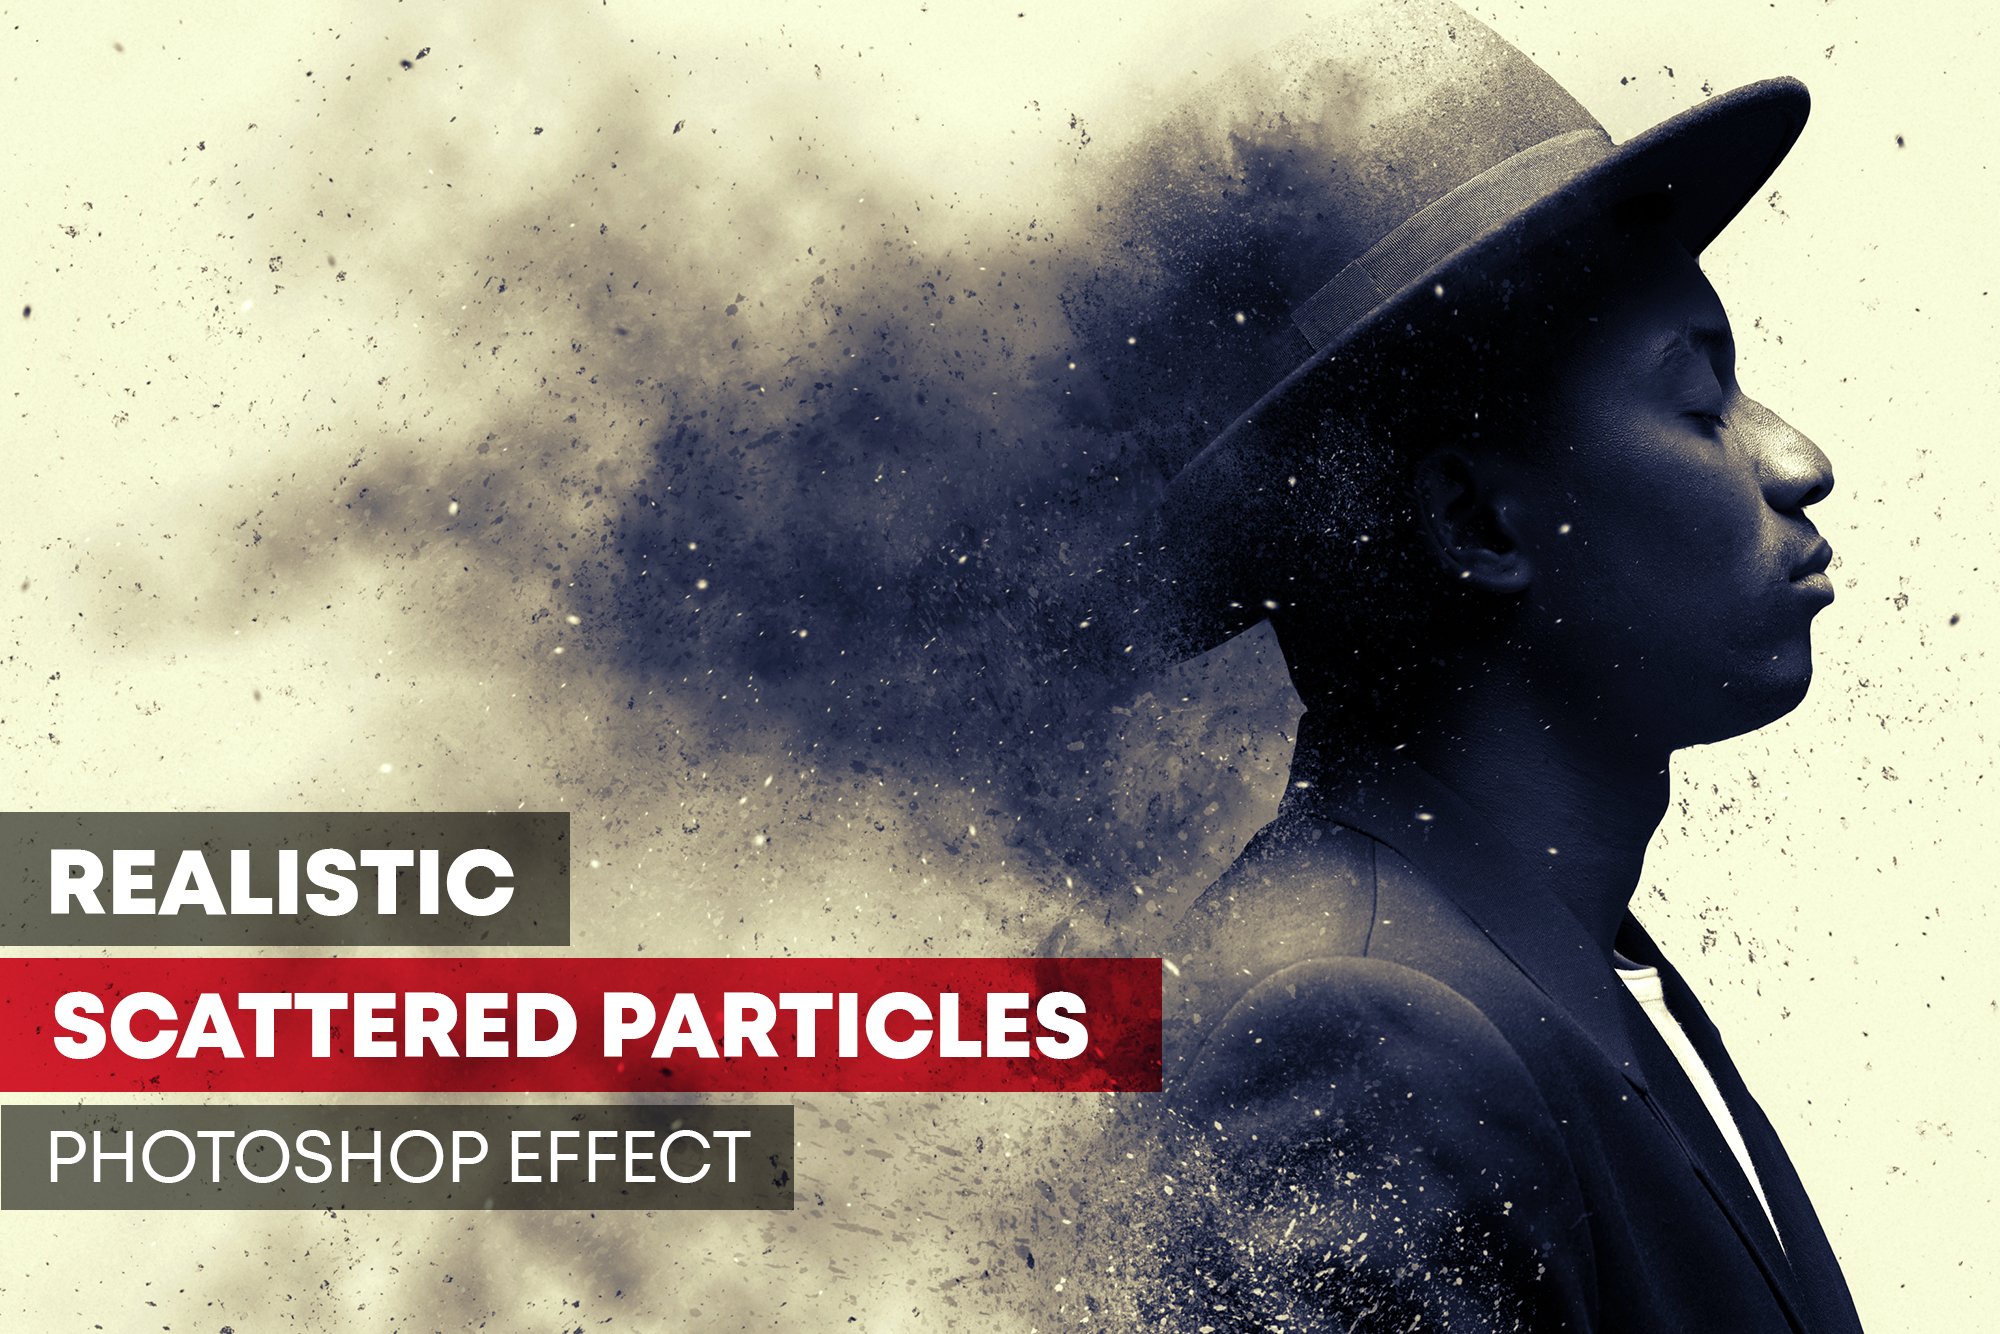 Scattered Particles Photoshop Effectcover image.